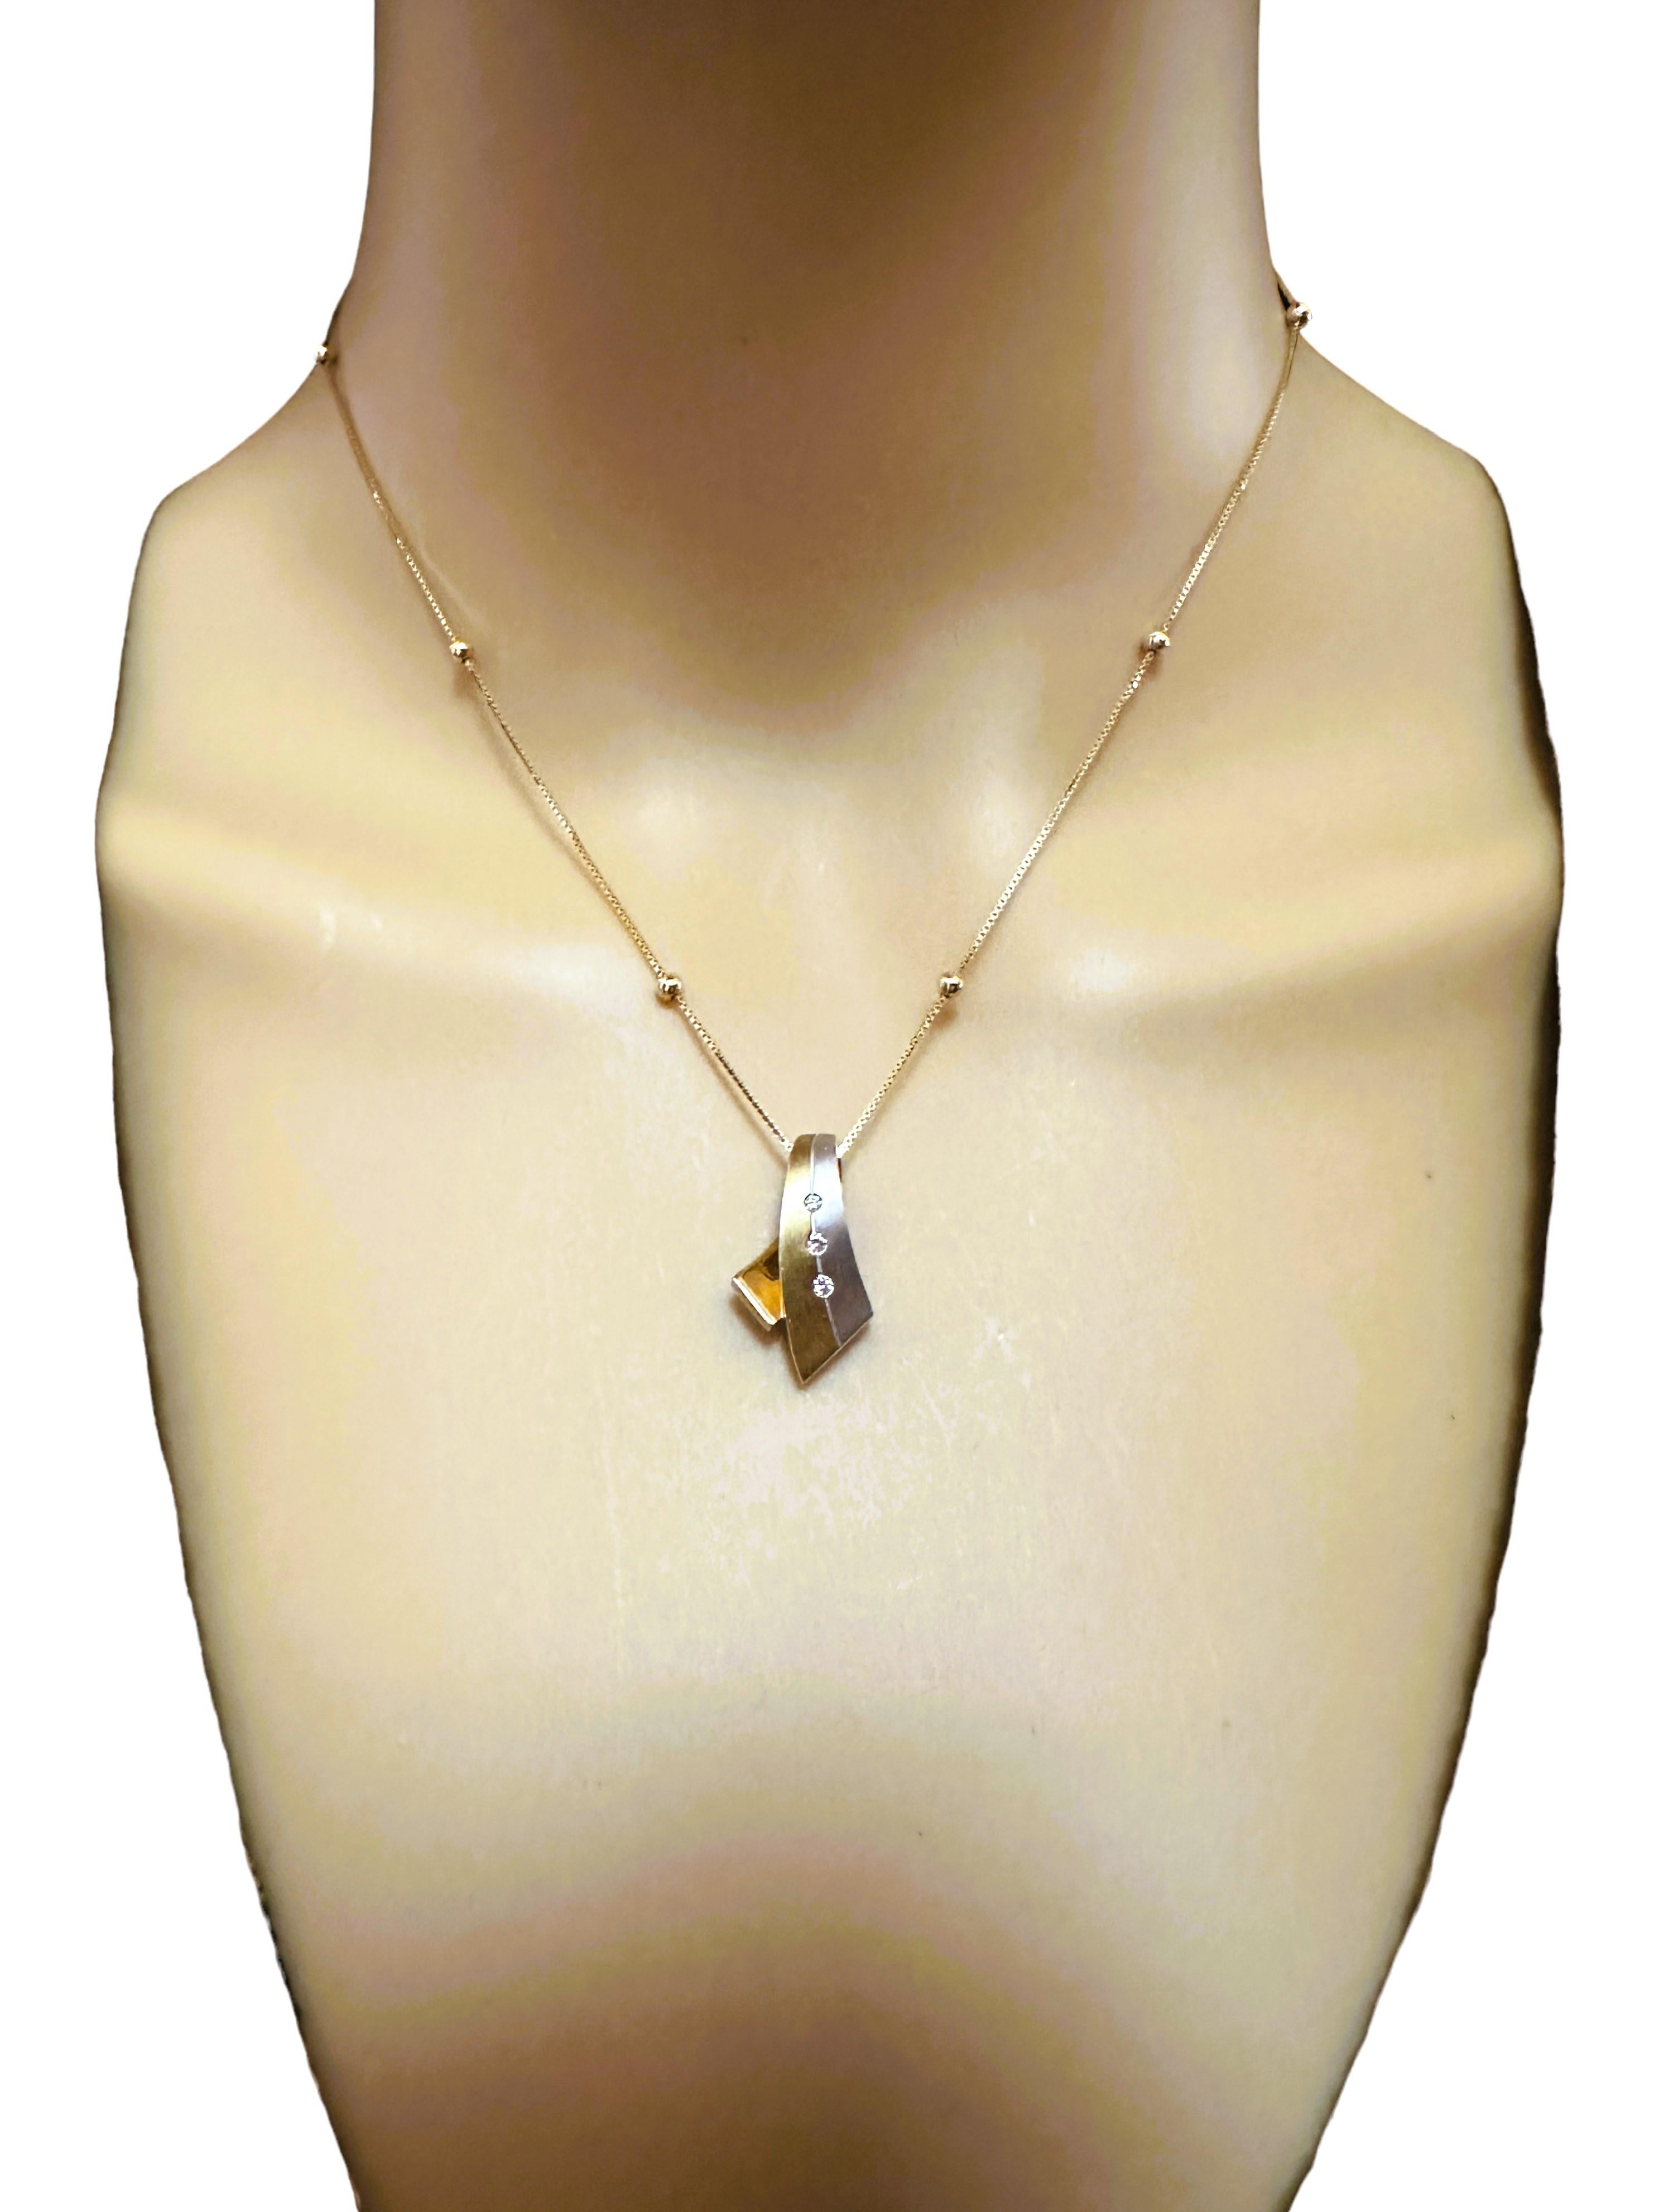 Women's 14k Yellow Gold Italian Necklace with Spaced Beads - 16